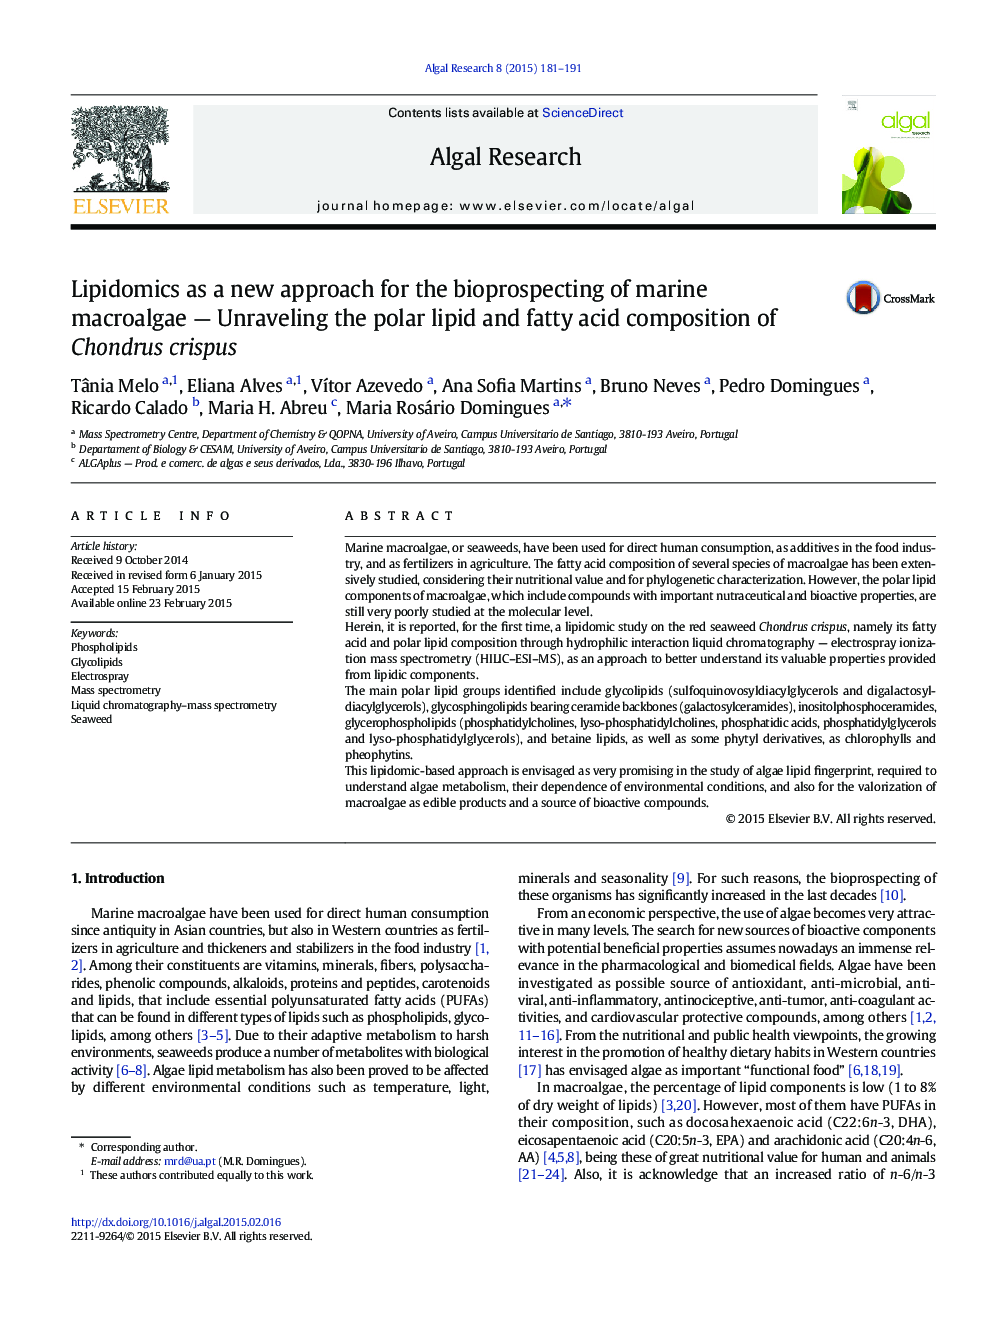 Lipidomics as a new approach for the bioprospecting of marine macroalgae - Unraveling the polar lipid and fatty acid composition of Chondrus crispus